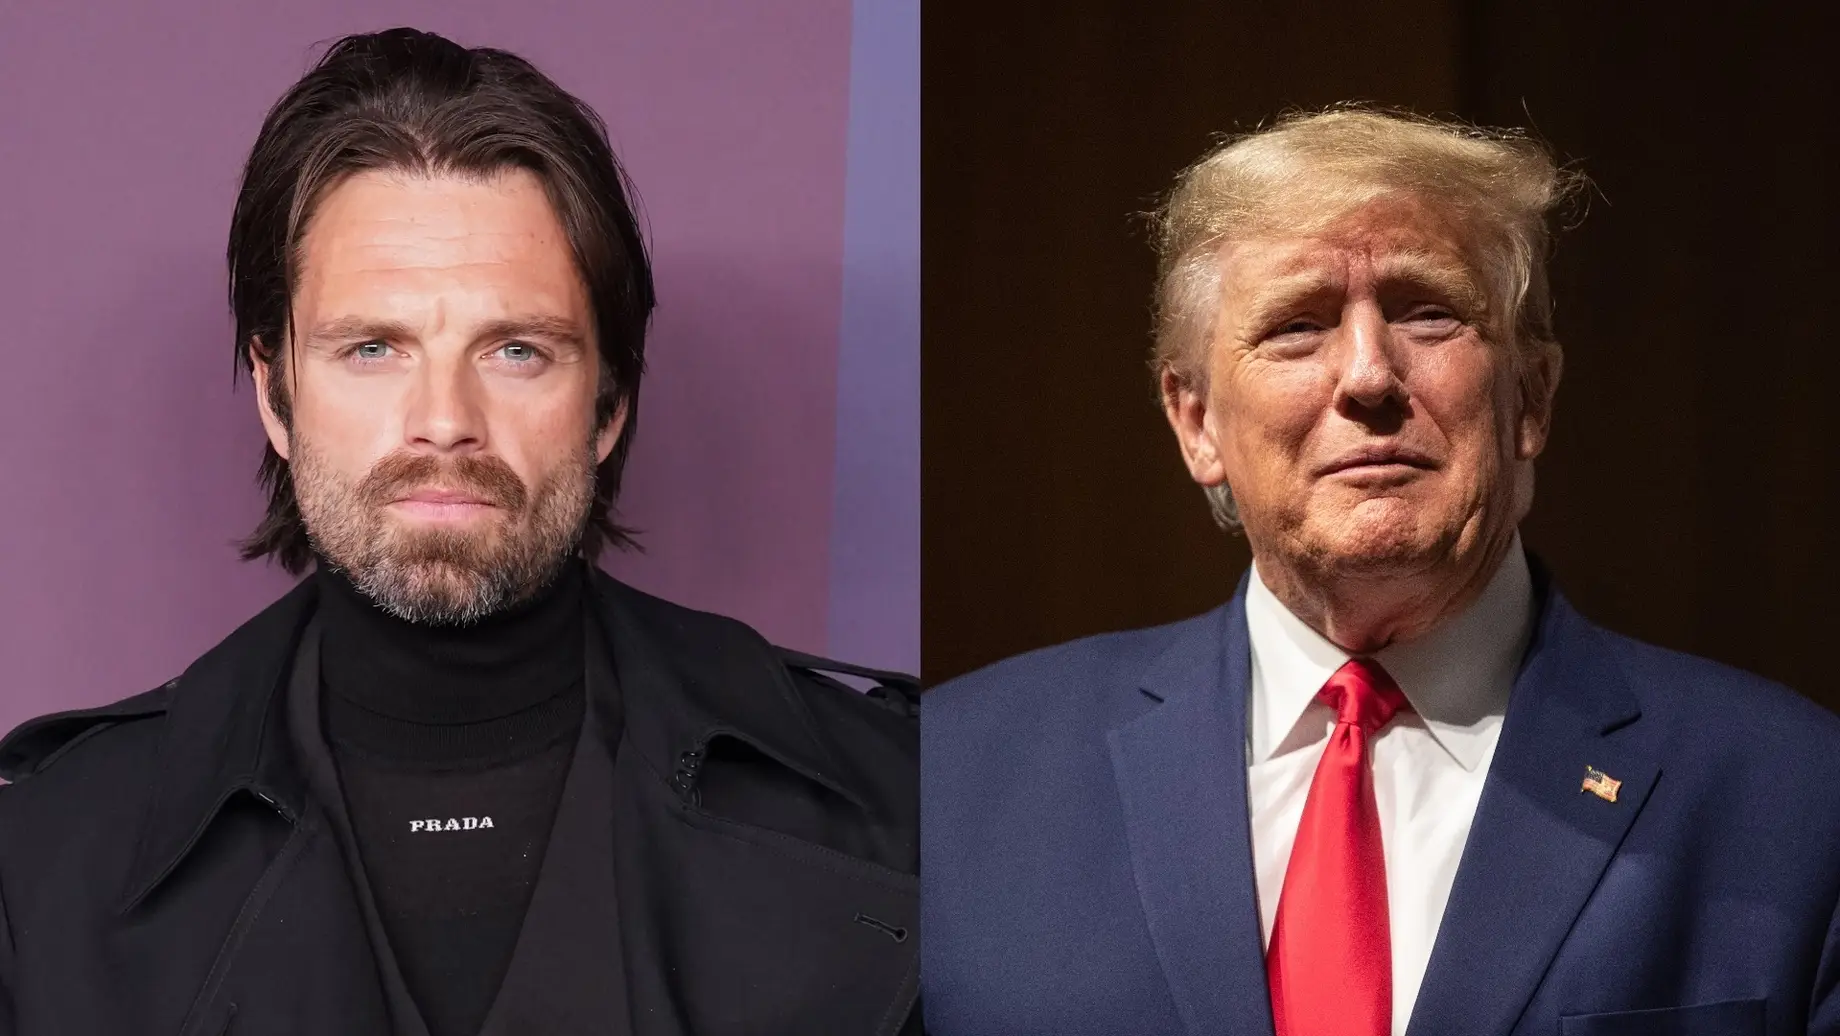 Say What Now? Sebastian Stan Tapped to Play Young Donald Trump in ‘The Apprentice’ Movie